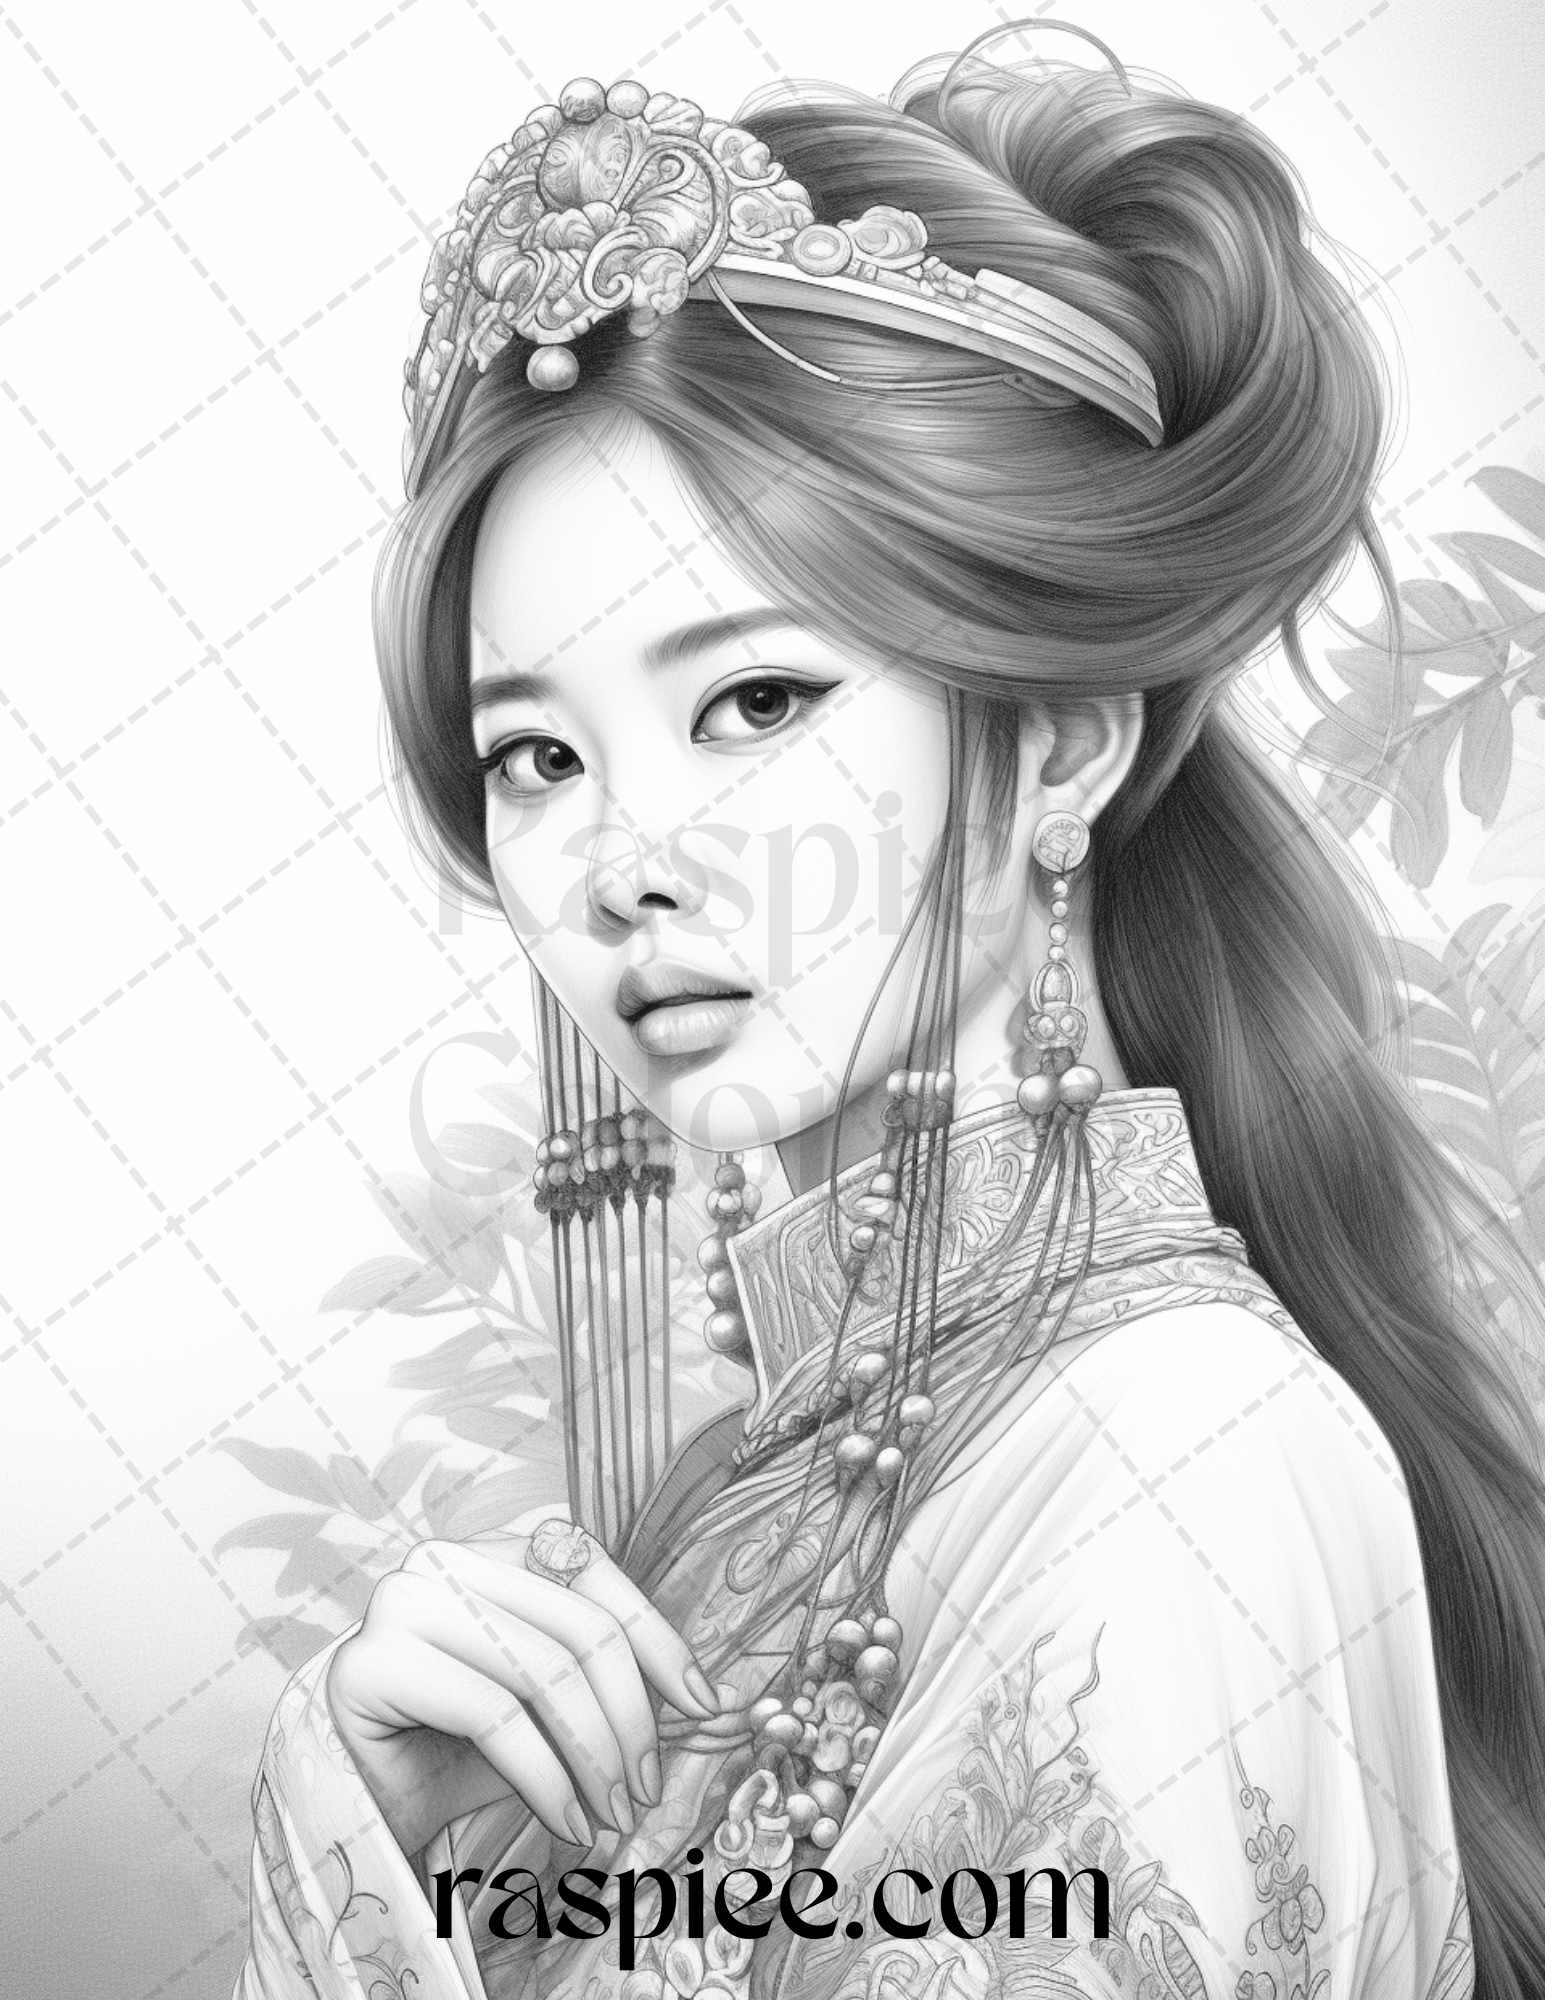 Chinese Girls Grayscale Coloring Page, Printable Adult Coloring Art, Relaxing Coloring Page for Adults, Intricate Chinese Girls Illustration, Mindful Grayscale Coloring Design, Portrait Coloring Pages for Adults